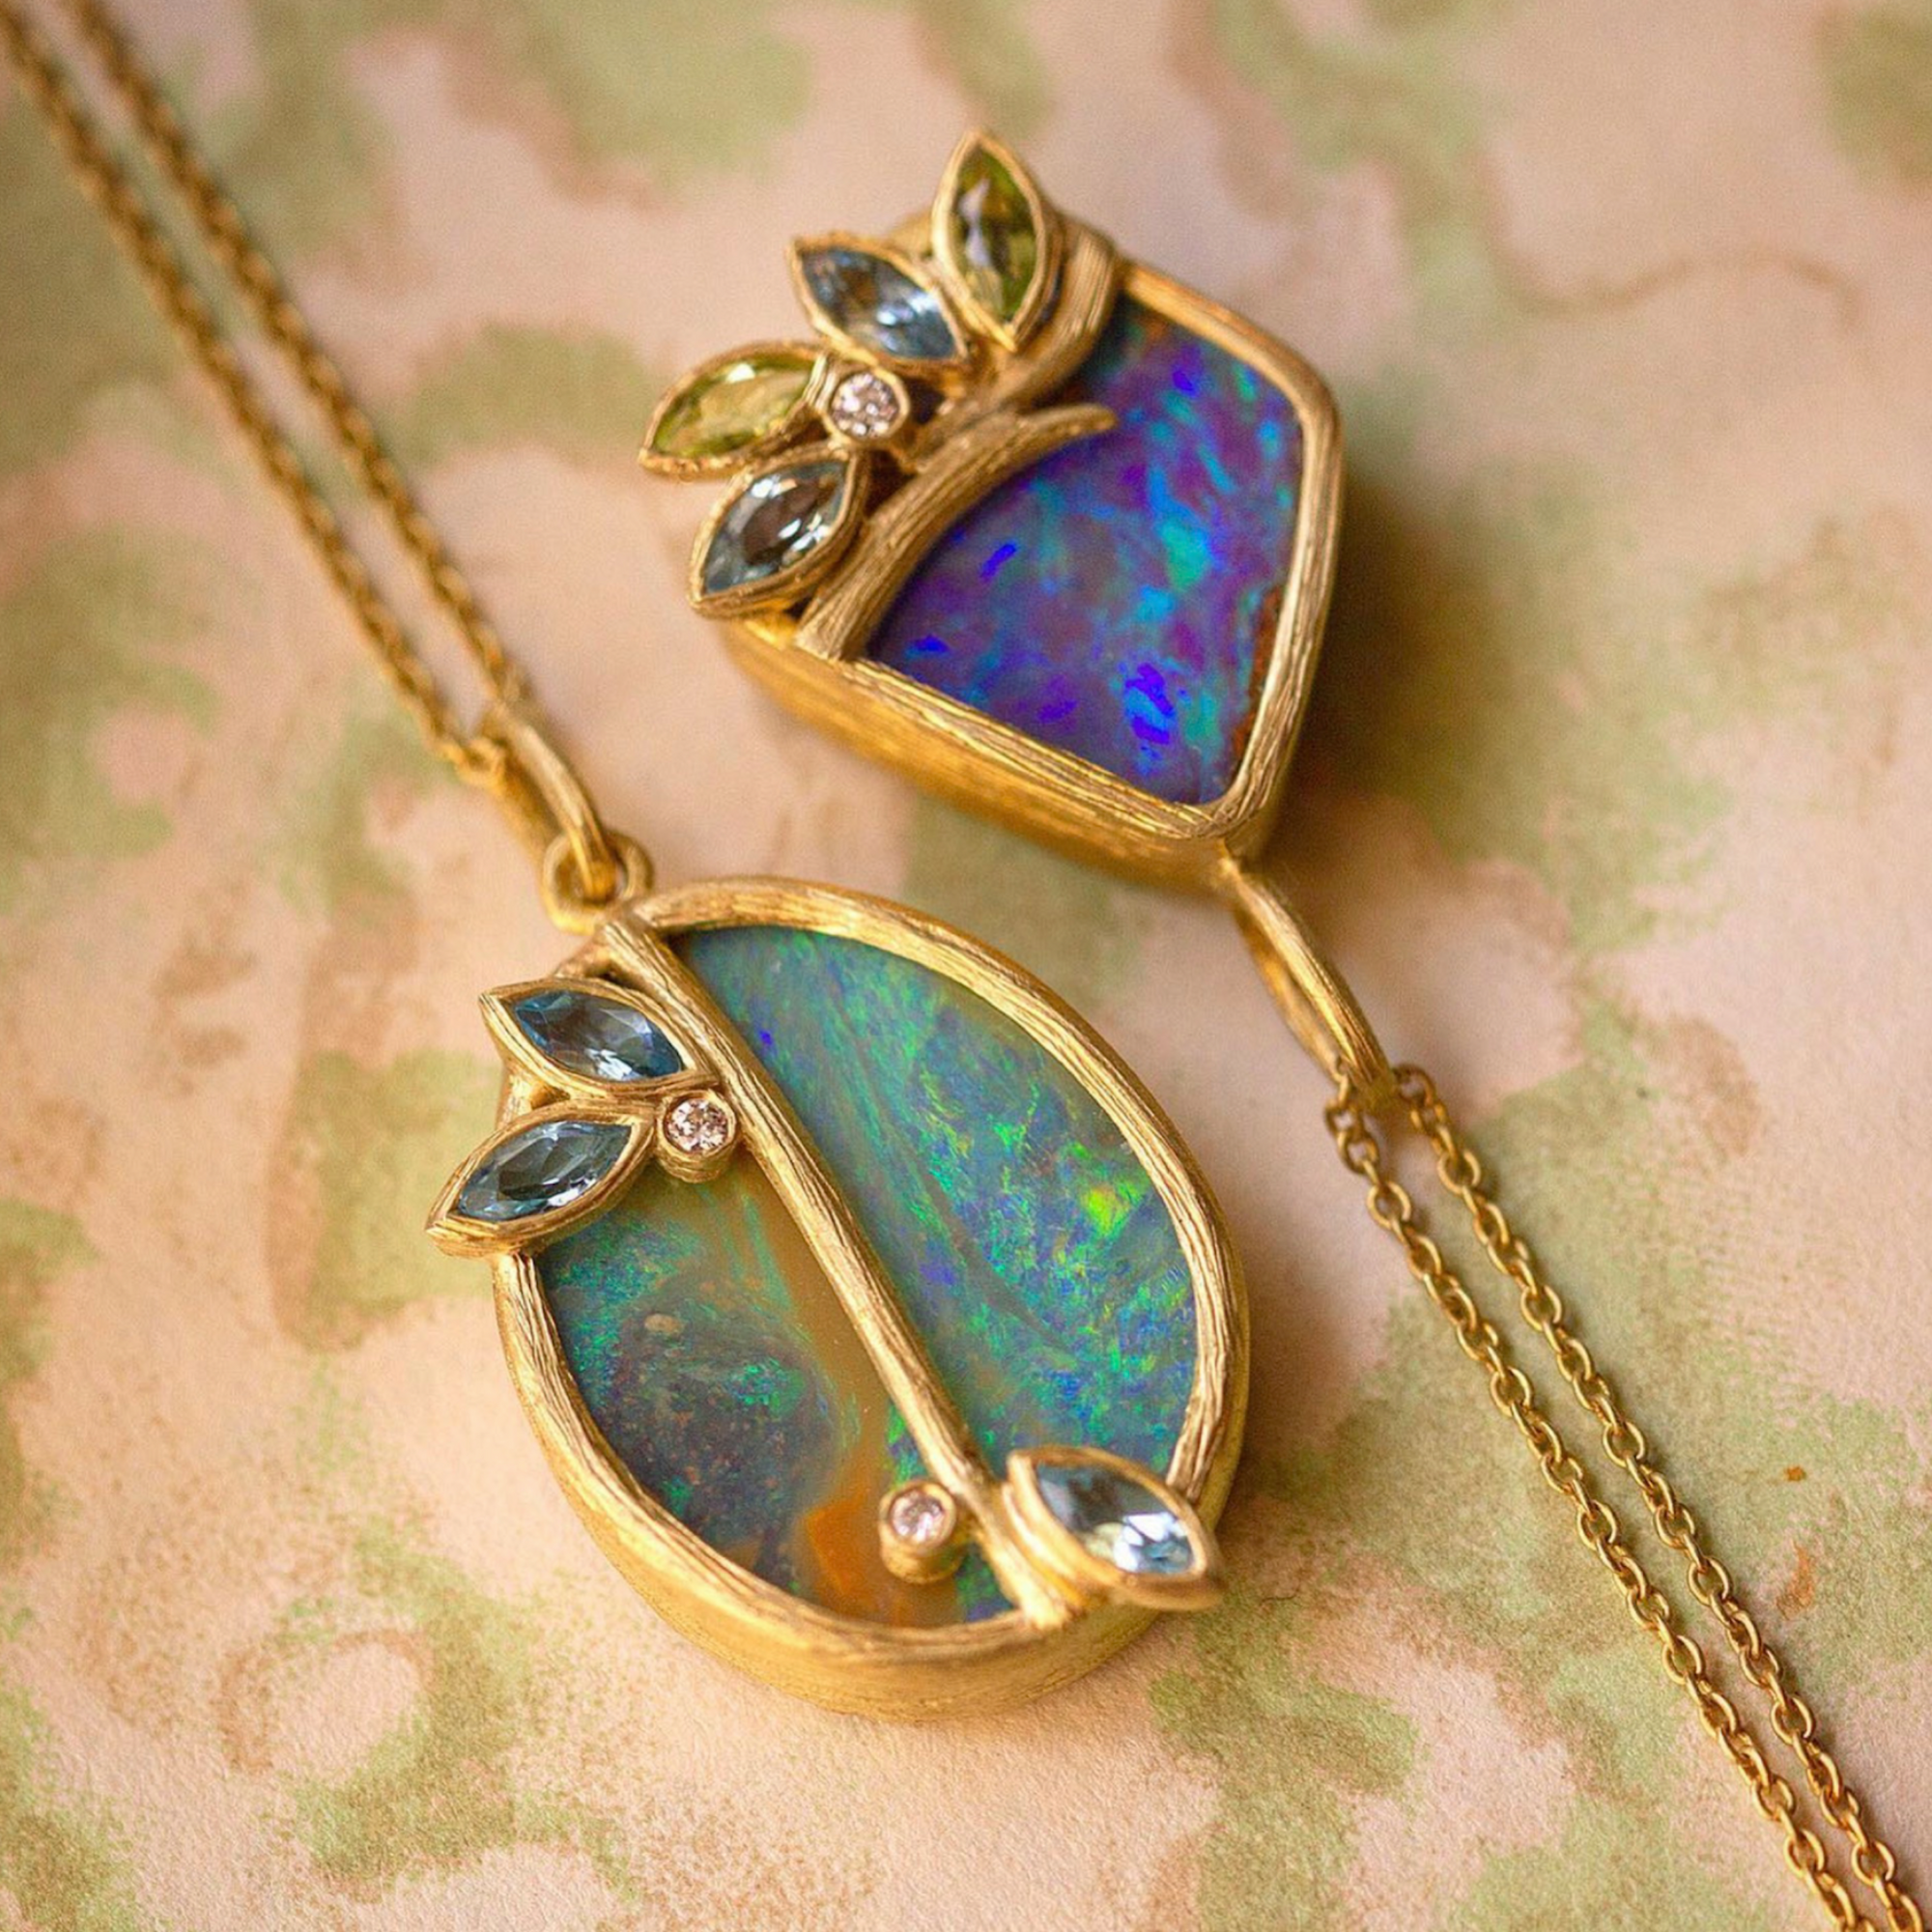 Petal Opal Necklace by Laurie Kaiser available at Talisman Collection Fine Jewelers in El Dorado Hills, CA and online. A one-of-a-kind piece crafted with a boulder opal set in an 18k gold frame. This special necklace is accentuated with peridot, Swiss blue topaz, and white diamonds and measures 17" long. It truly makes a statement without saying a word.